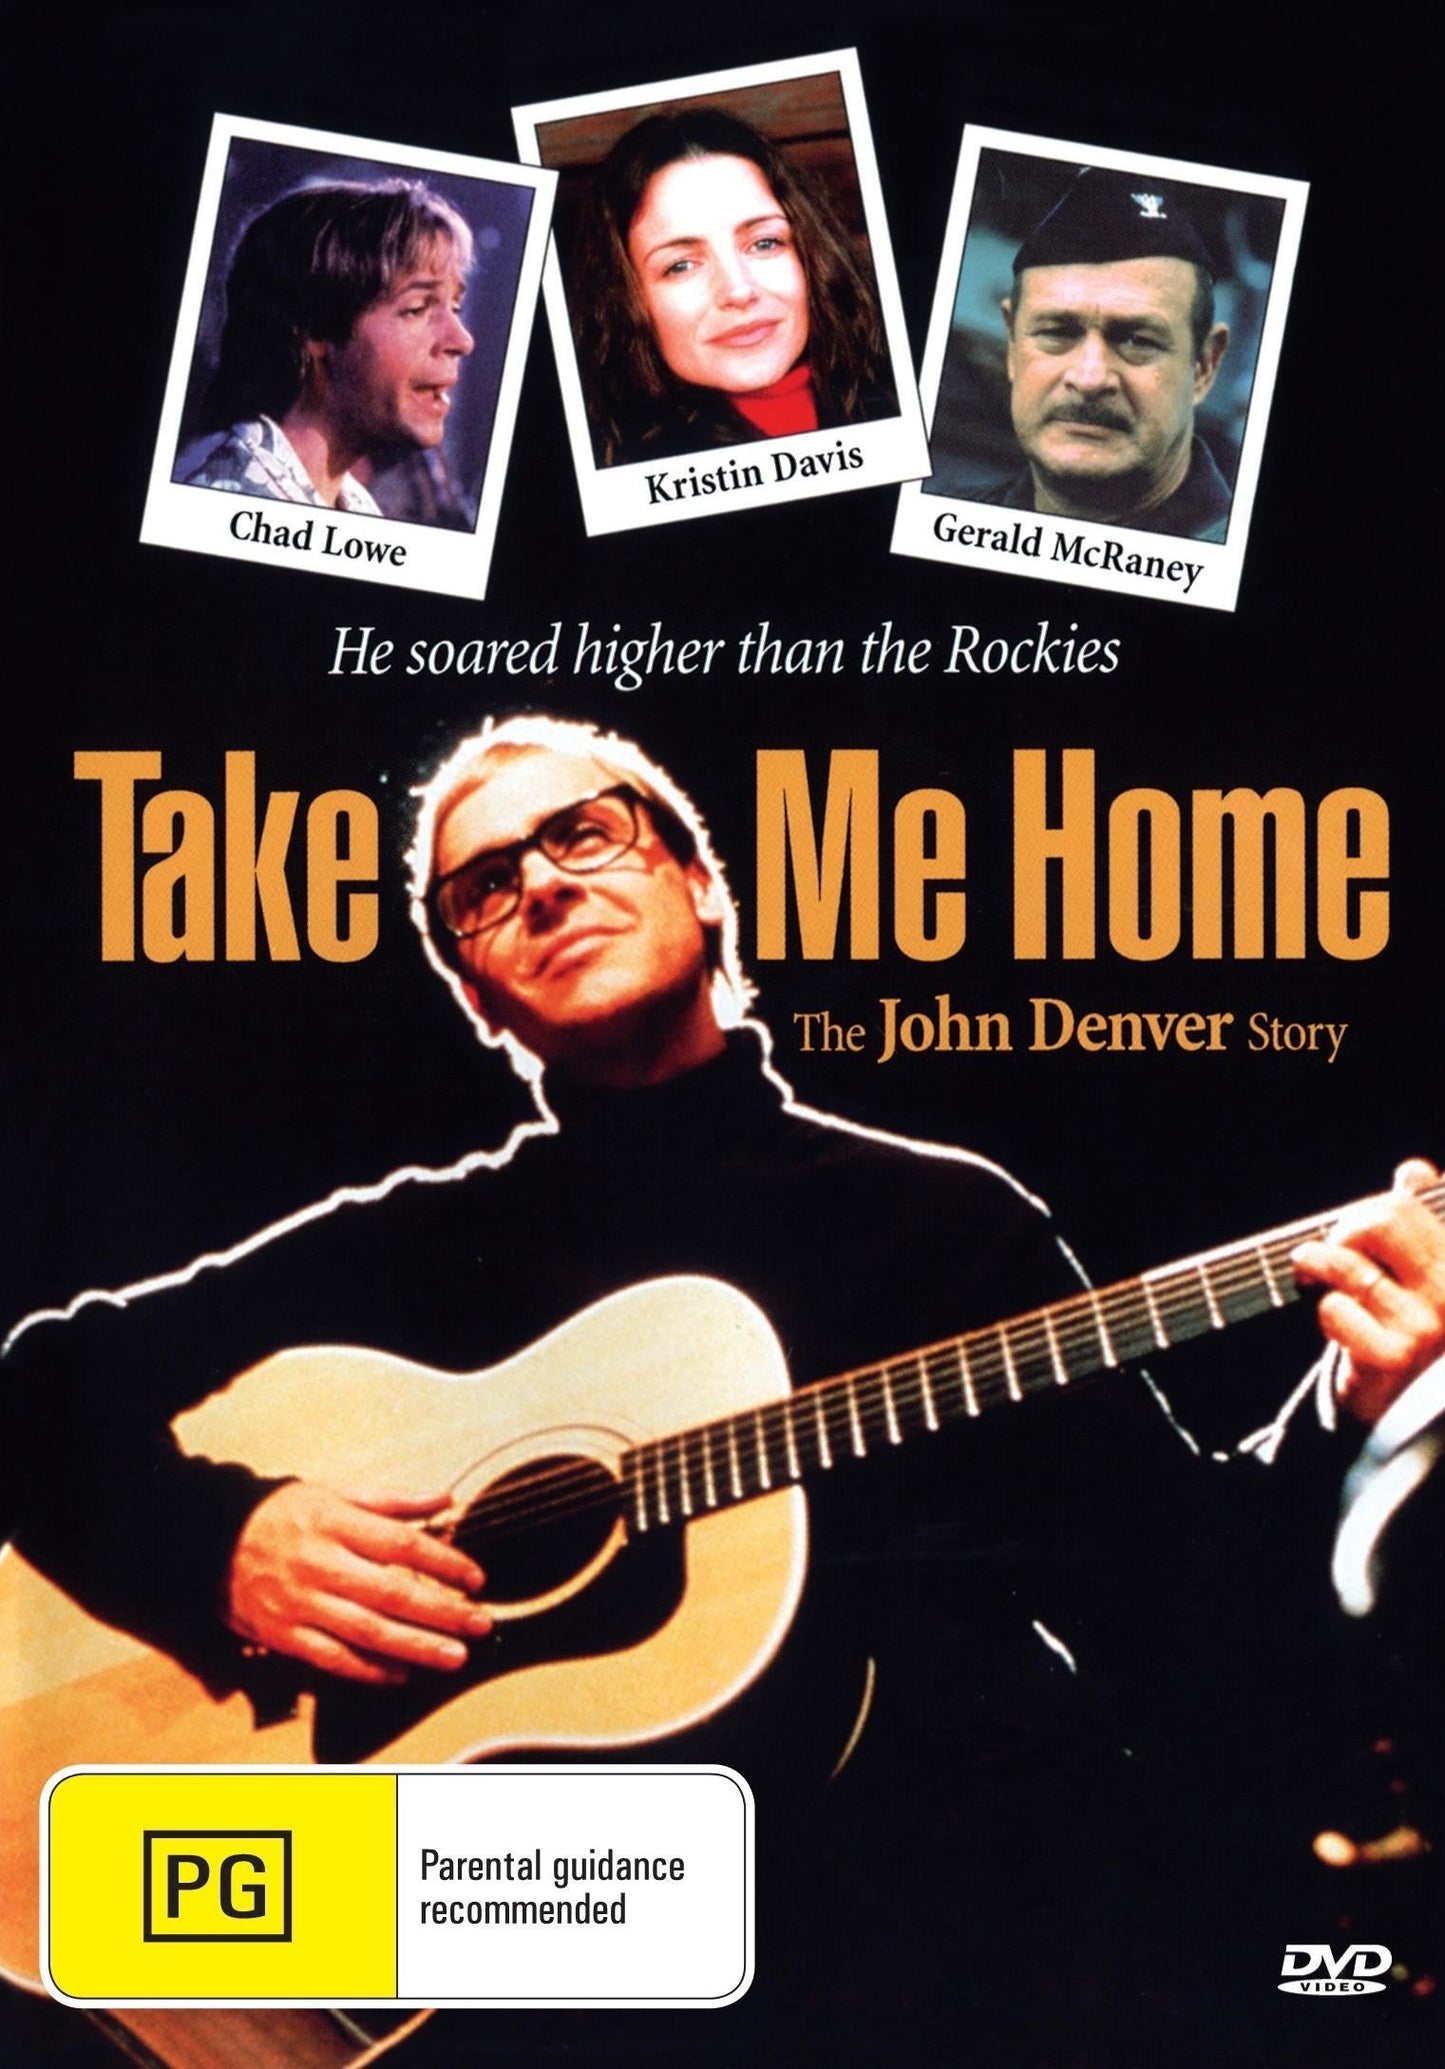 Take Me Home : The John Denver Story rareandcollectibledvds